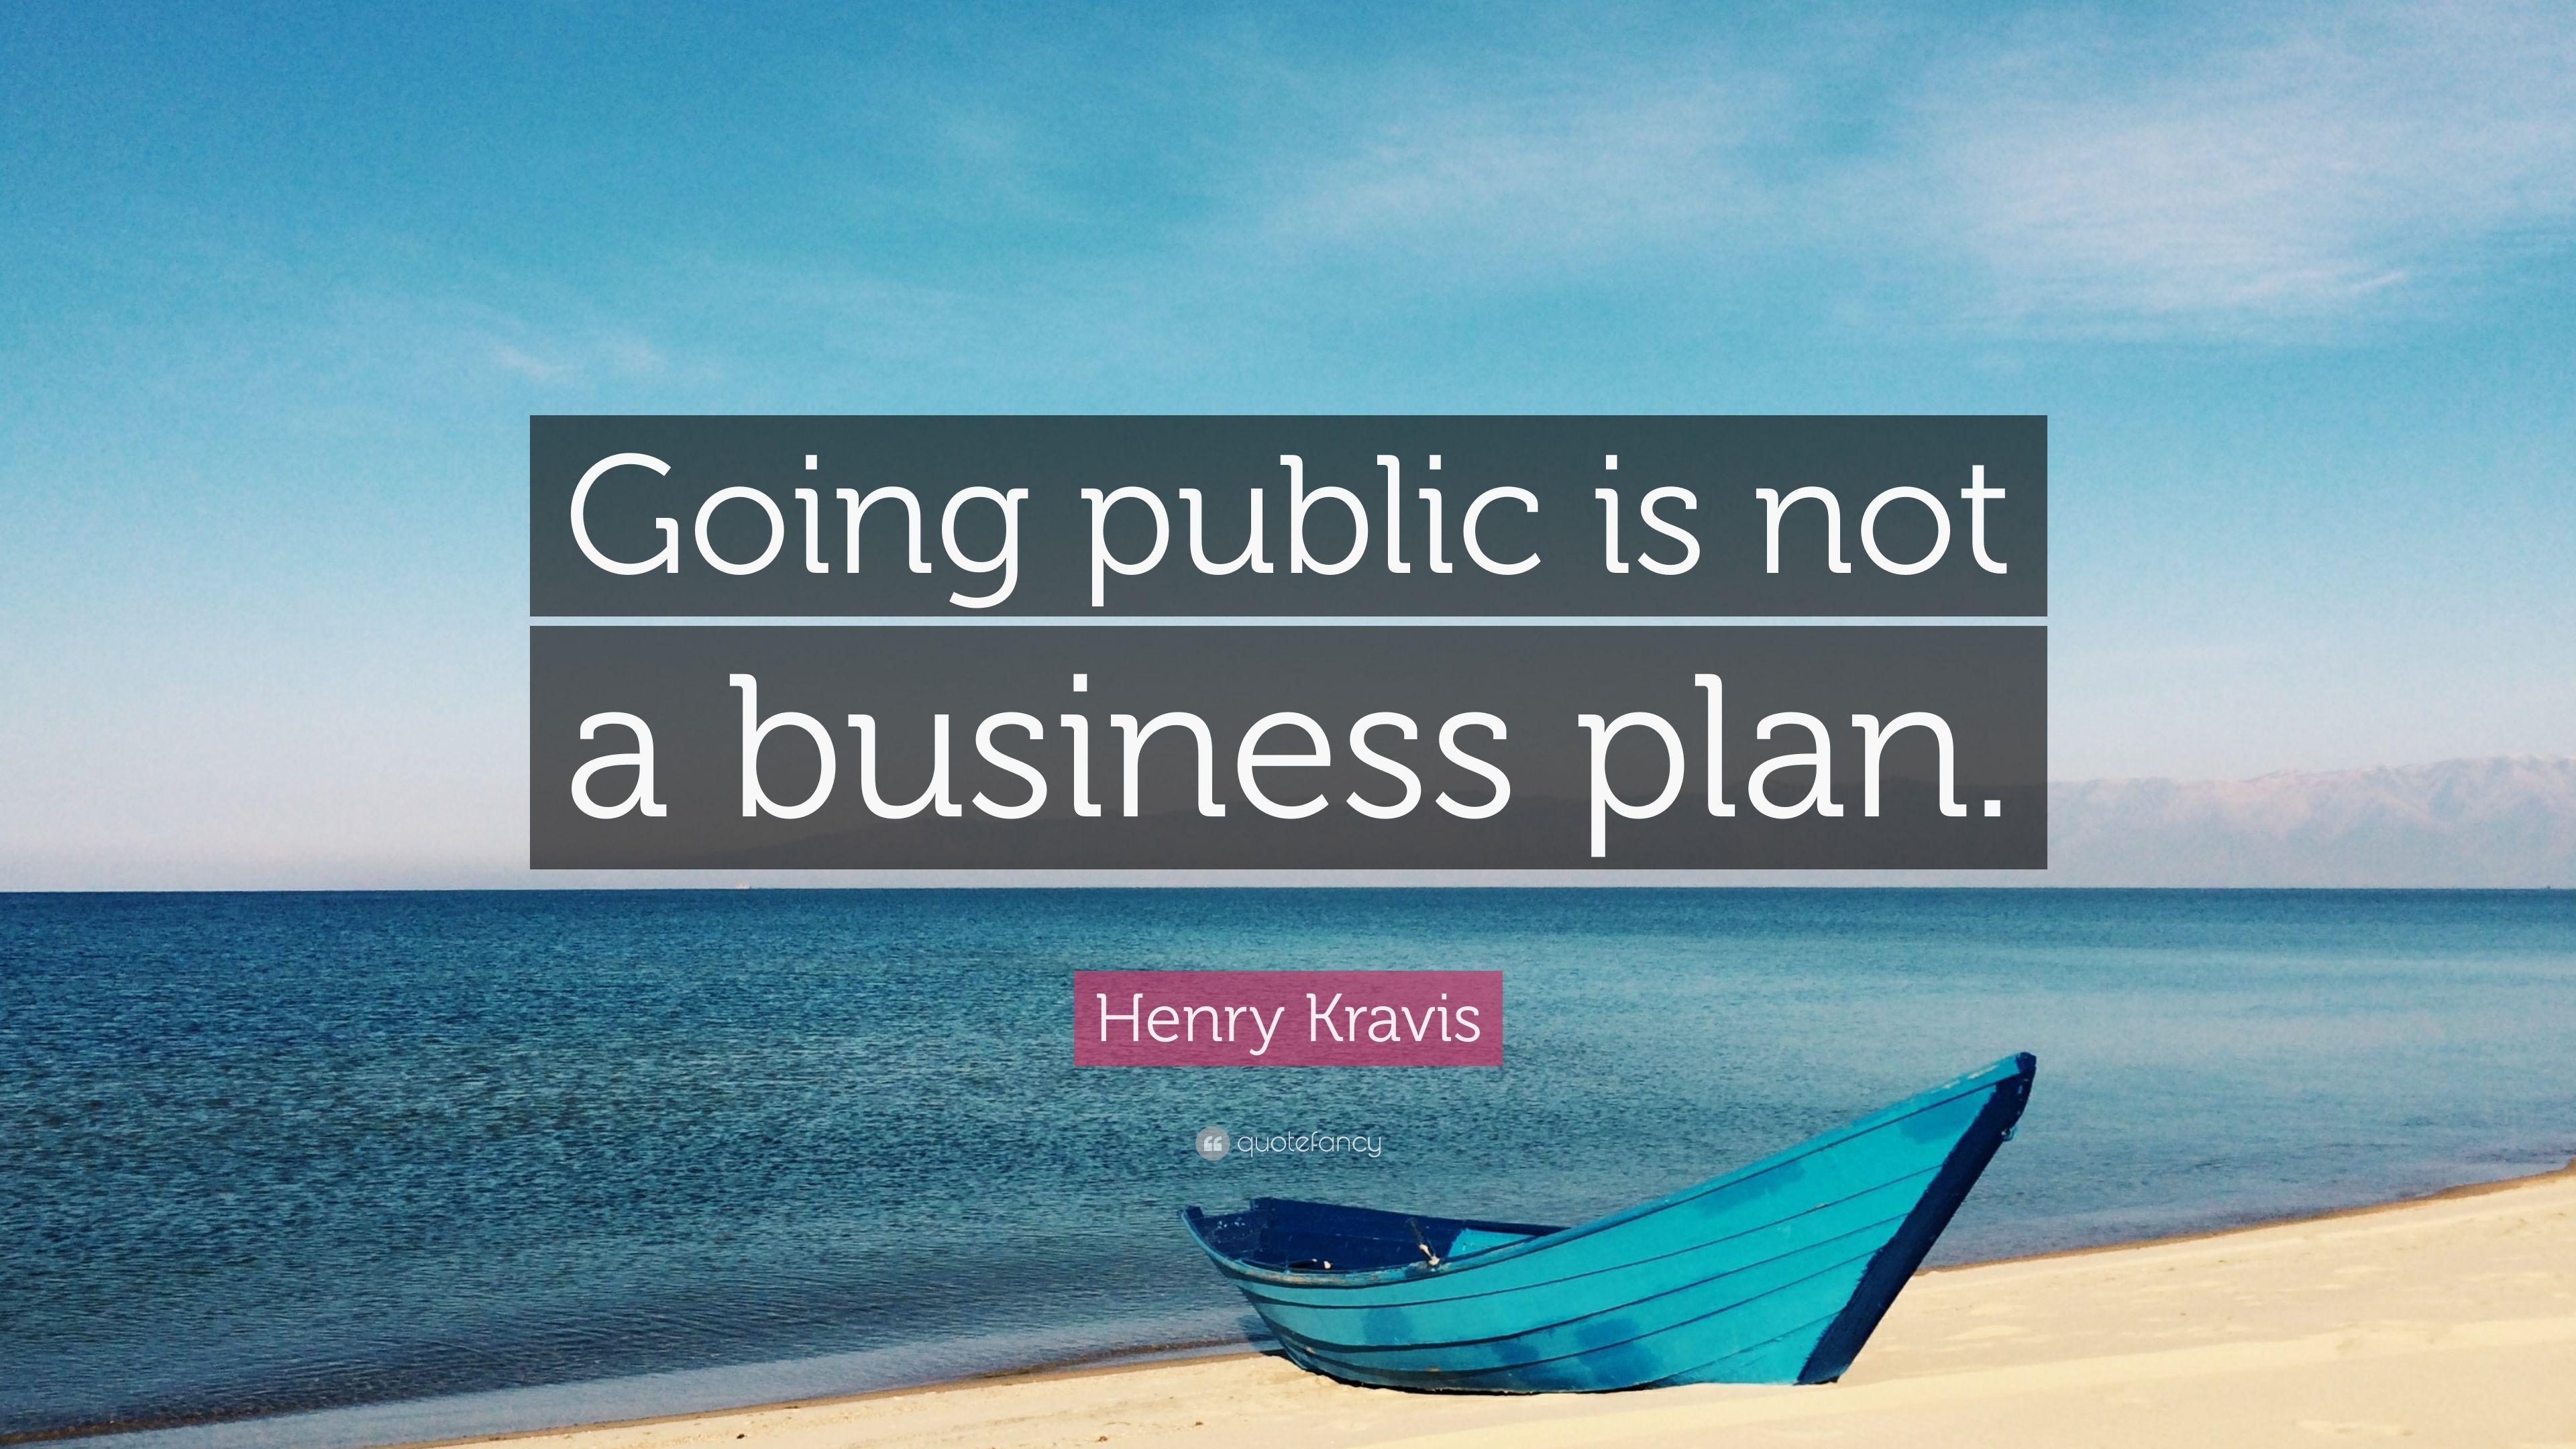 Henry Kravis Quote: “Going public is not a business plan